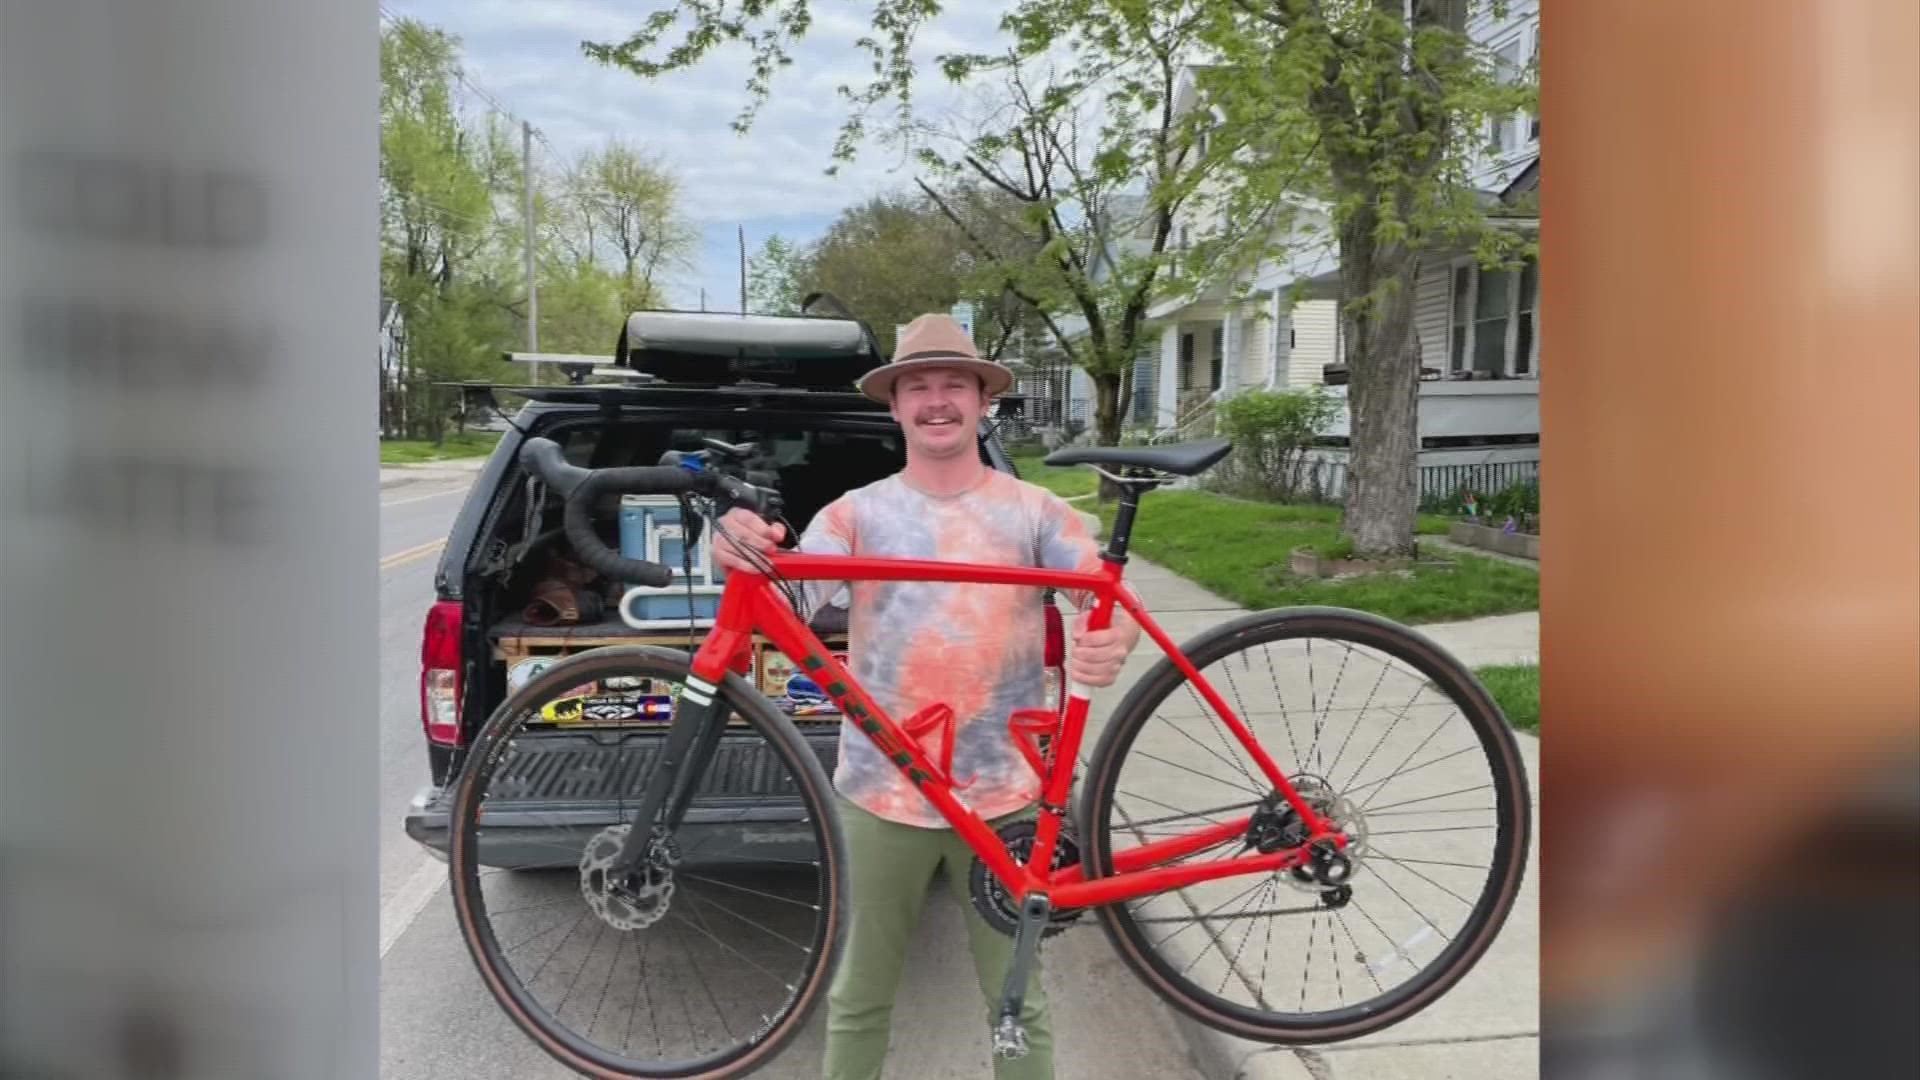 Jennings Java had its bike stolen on Tuesday. The bike was returned less than two days later after the community helped.